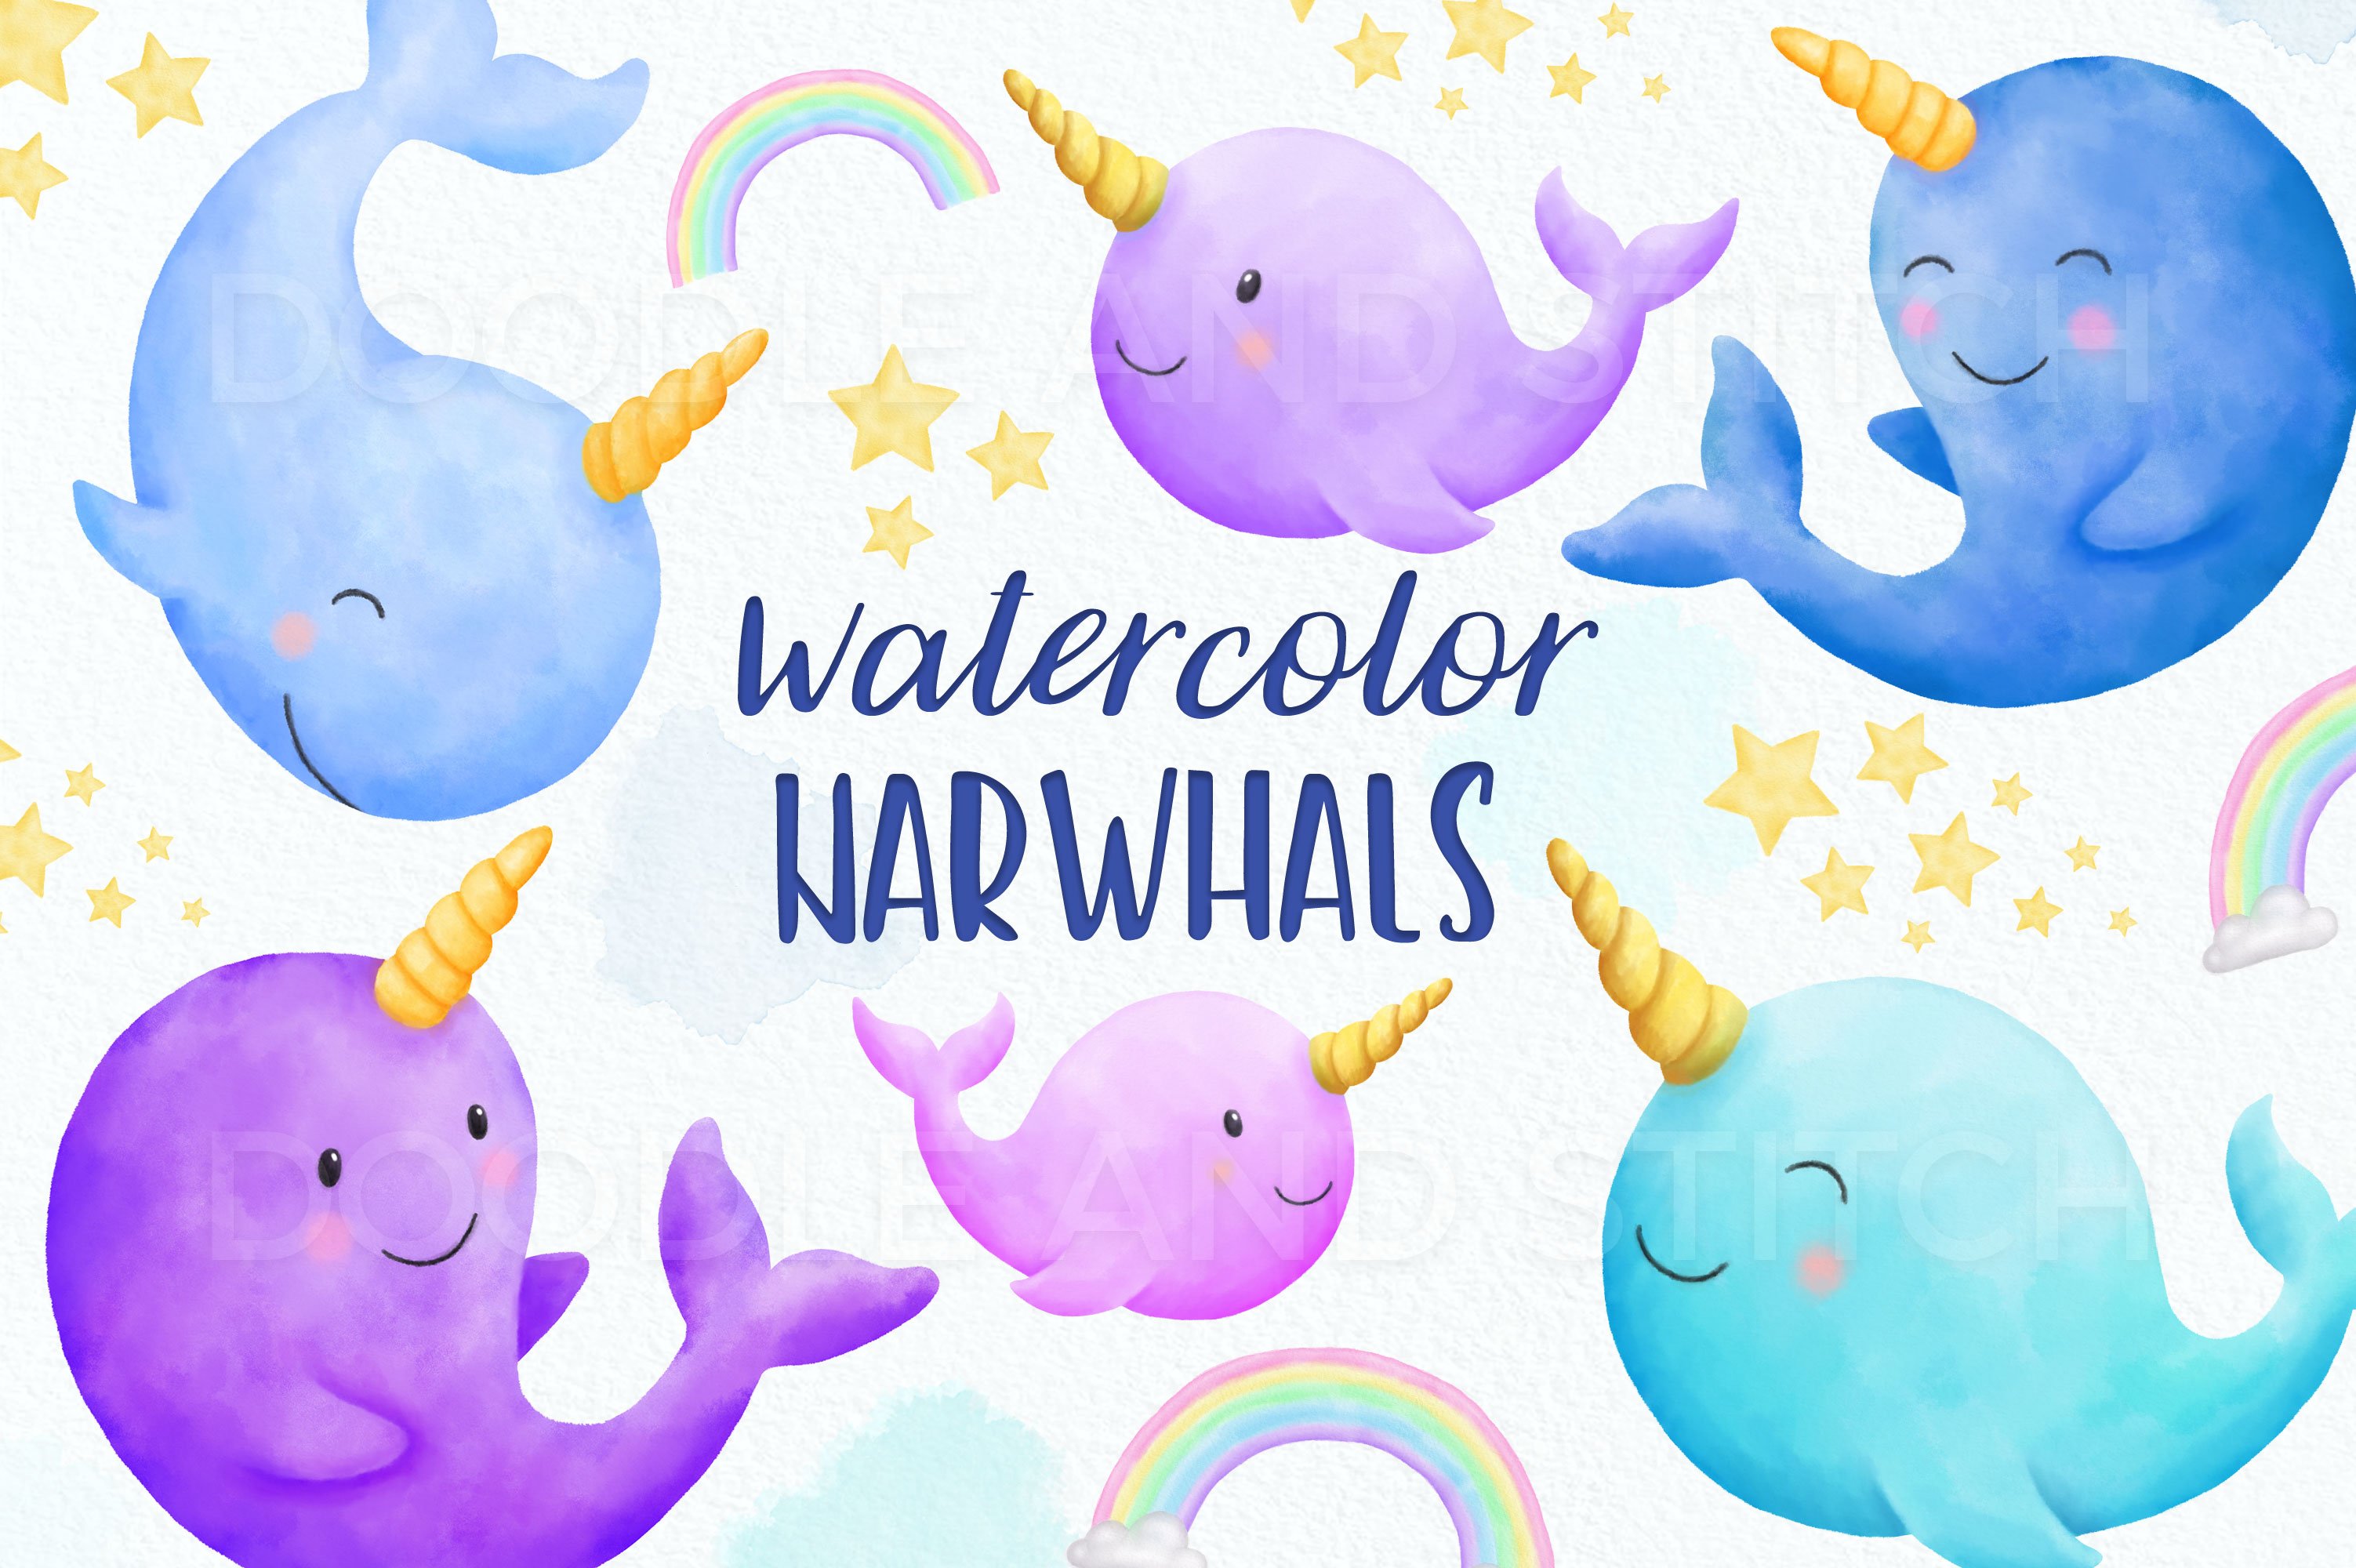 Narwhal Watercolor Illustrations cover image.